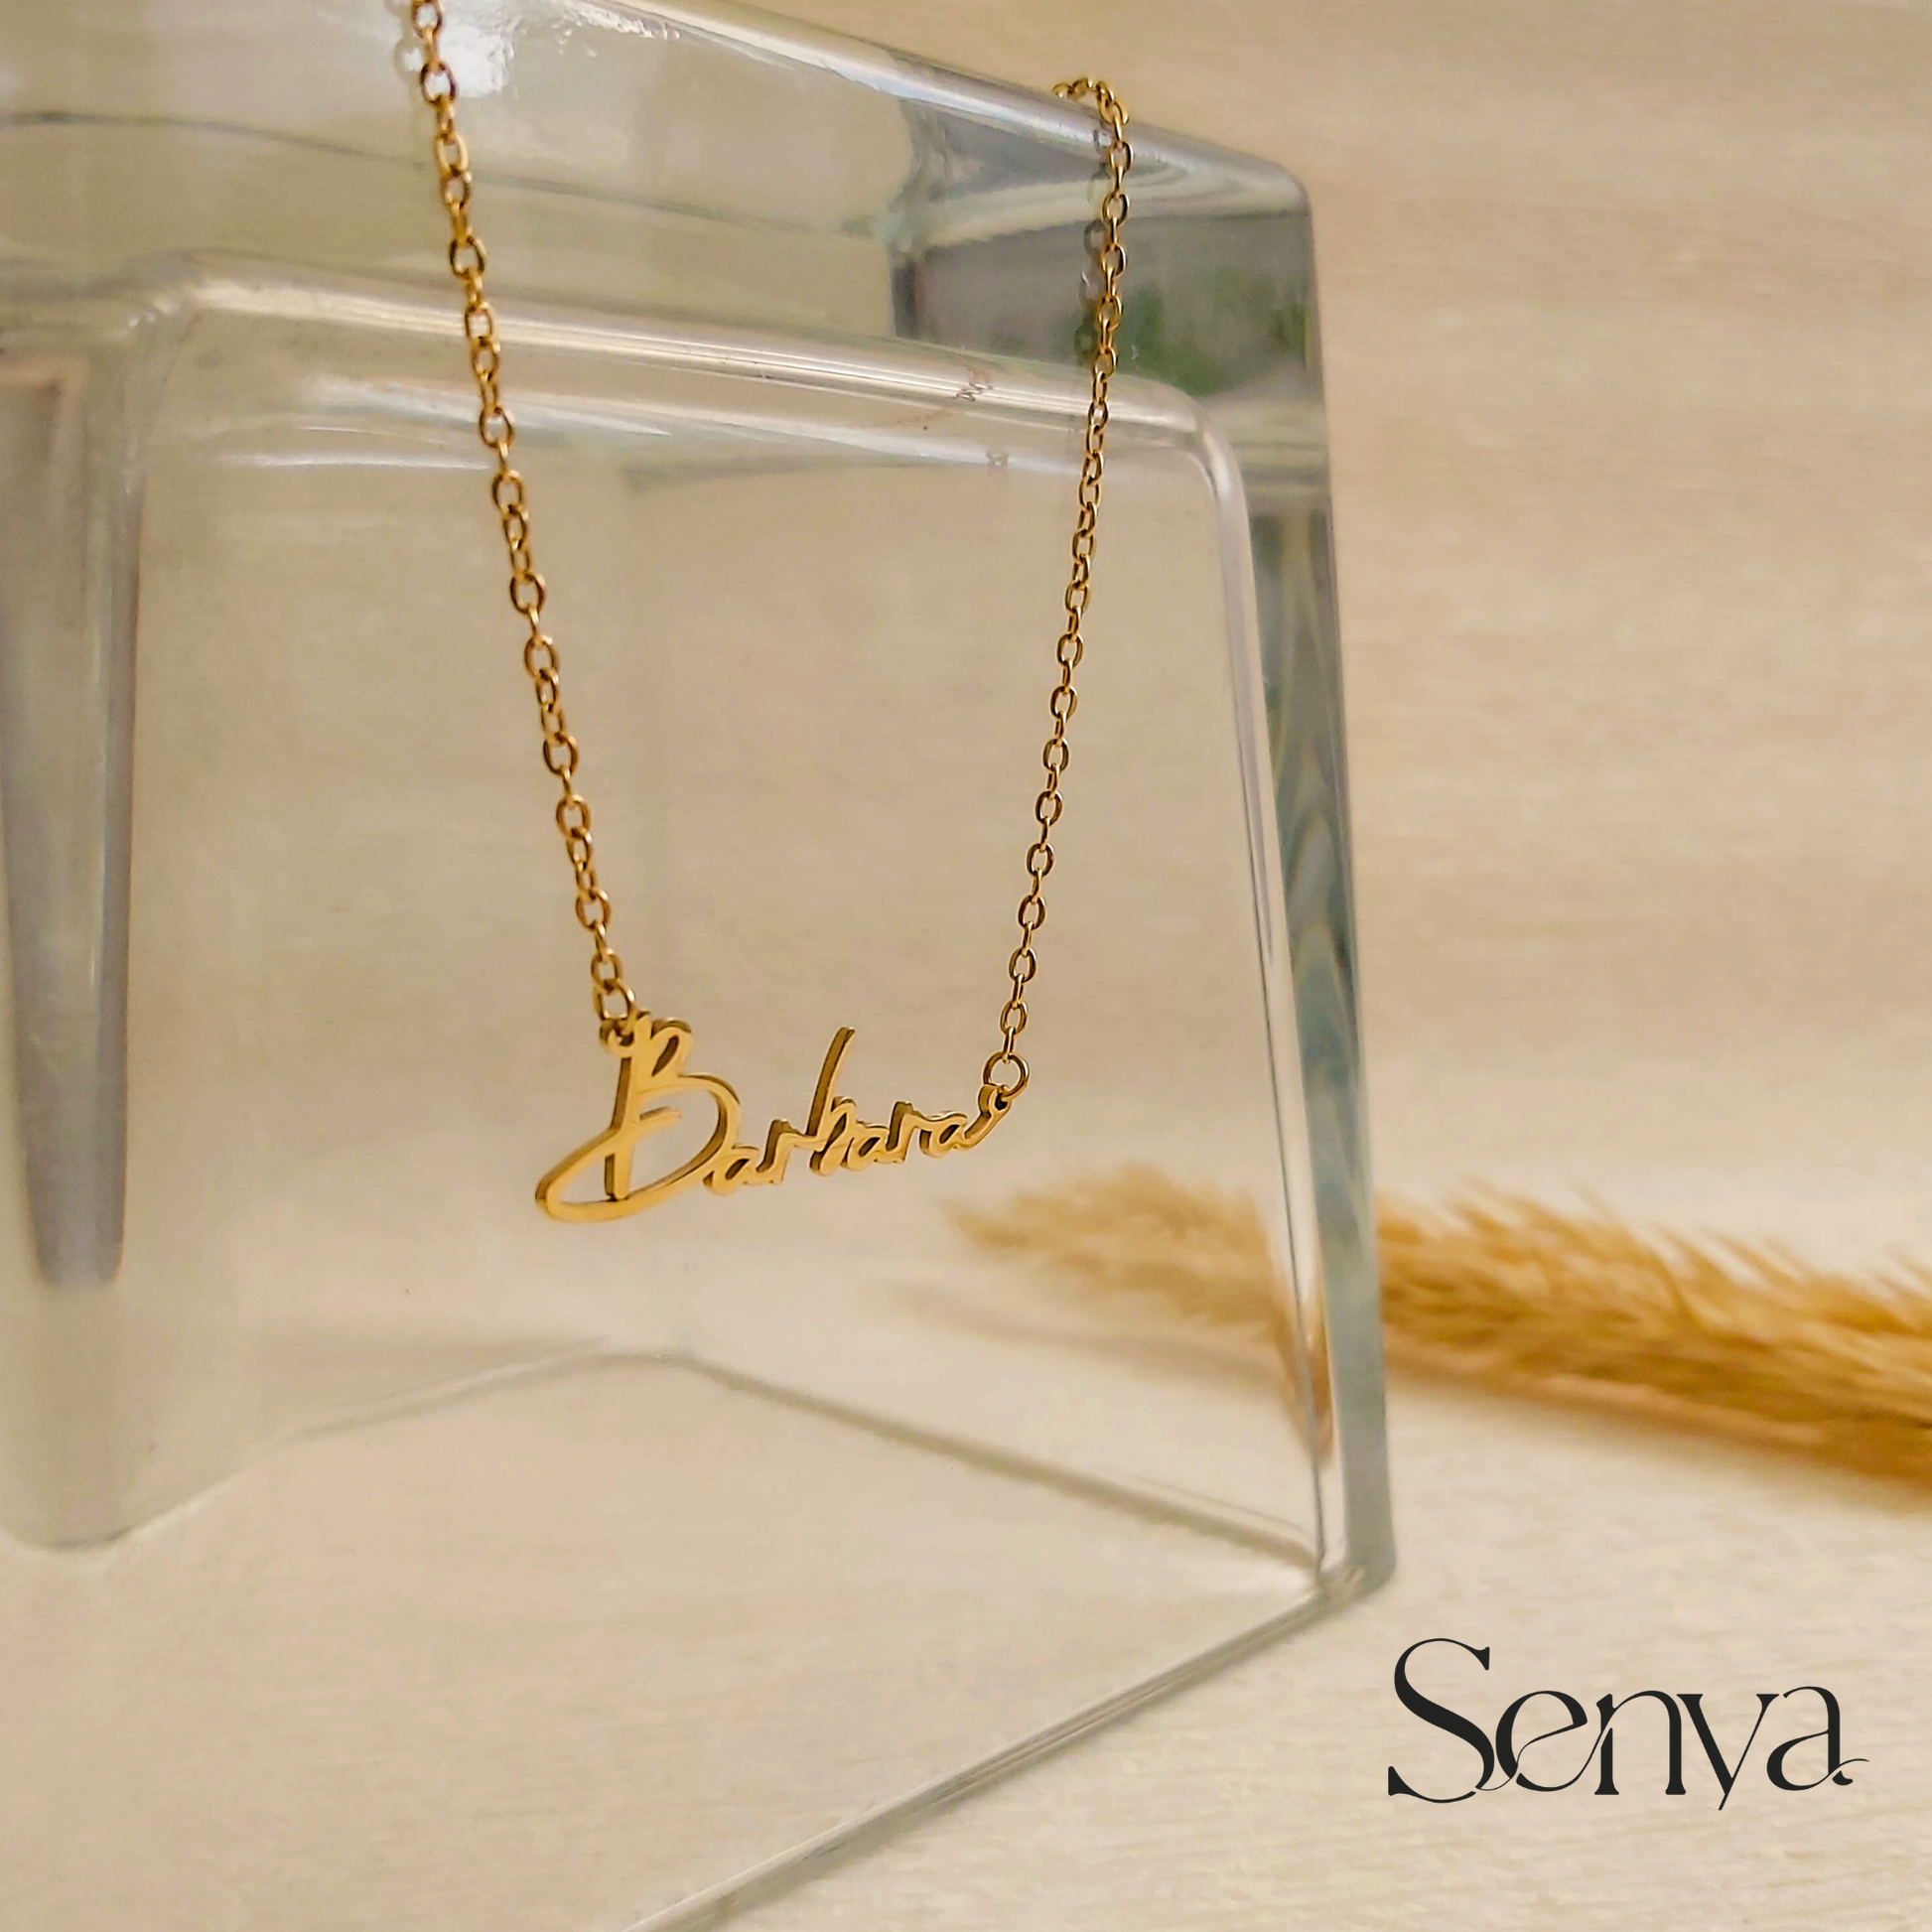 Where to buy a Custom Name Necklace, Unique Custom Name Necklace Designs, Custom Name Necklace , How to clean a Custom Name Necklace, Personalized Name Necklace, Dainty Custom Name Necklace, Women's Name Necklaces, Couples Name Necklaces, 14k Gold Custom Name Necklace , Bold Custom Name Necklace , Minimalist Custom Name Necklace ,